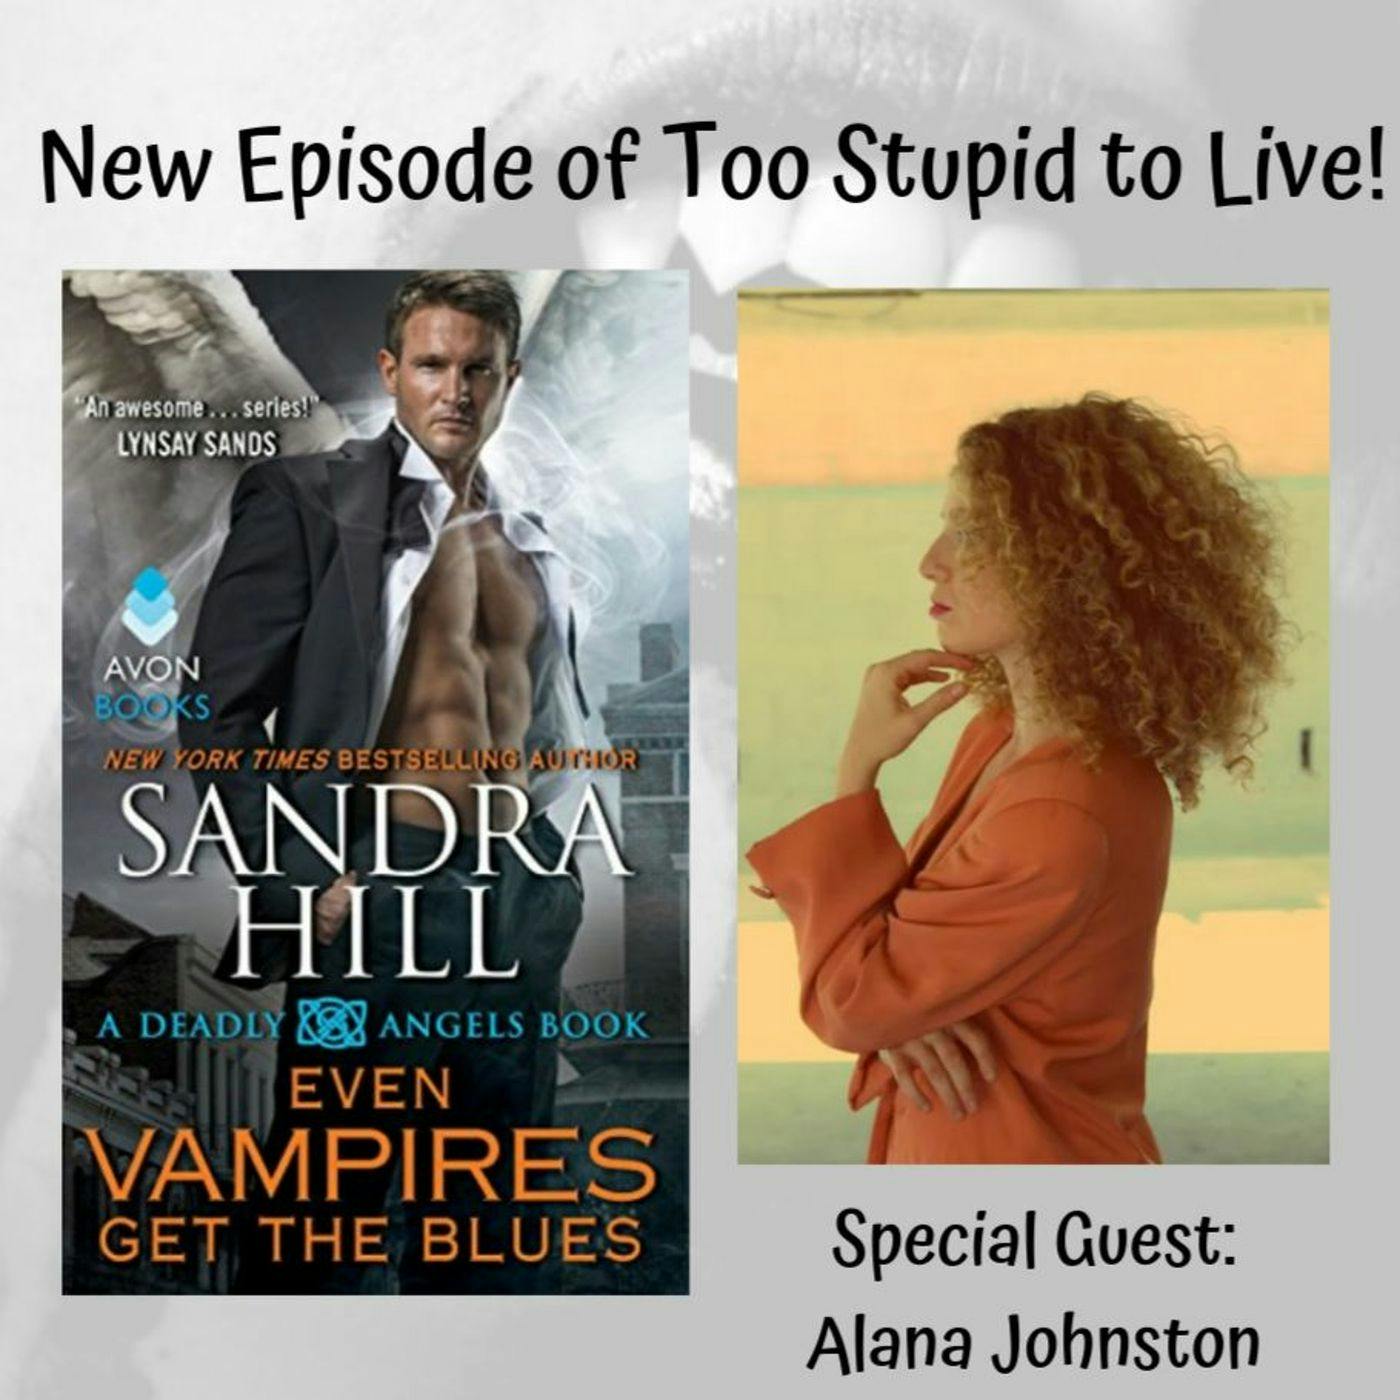 Even Vampires Get the Blues with Alana Johnston